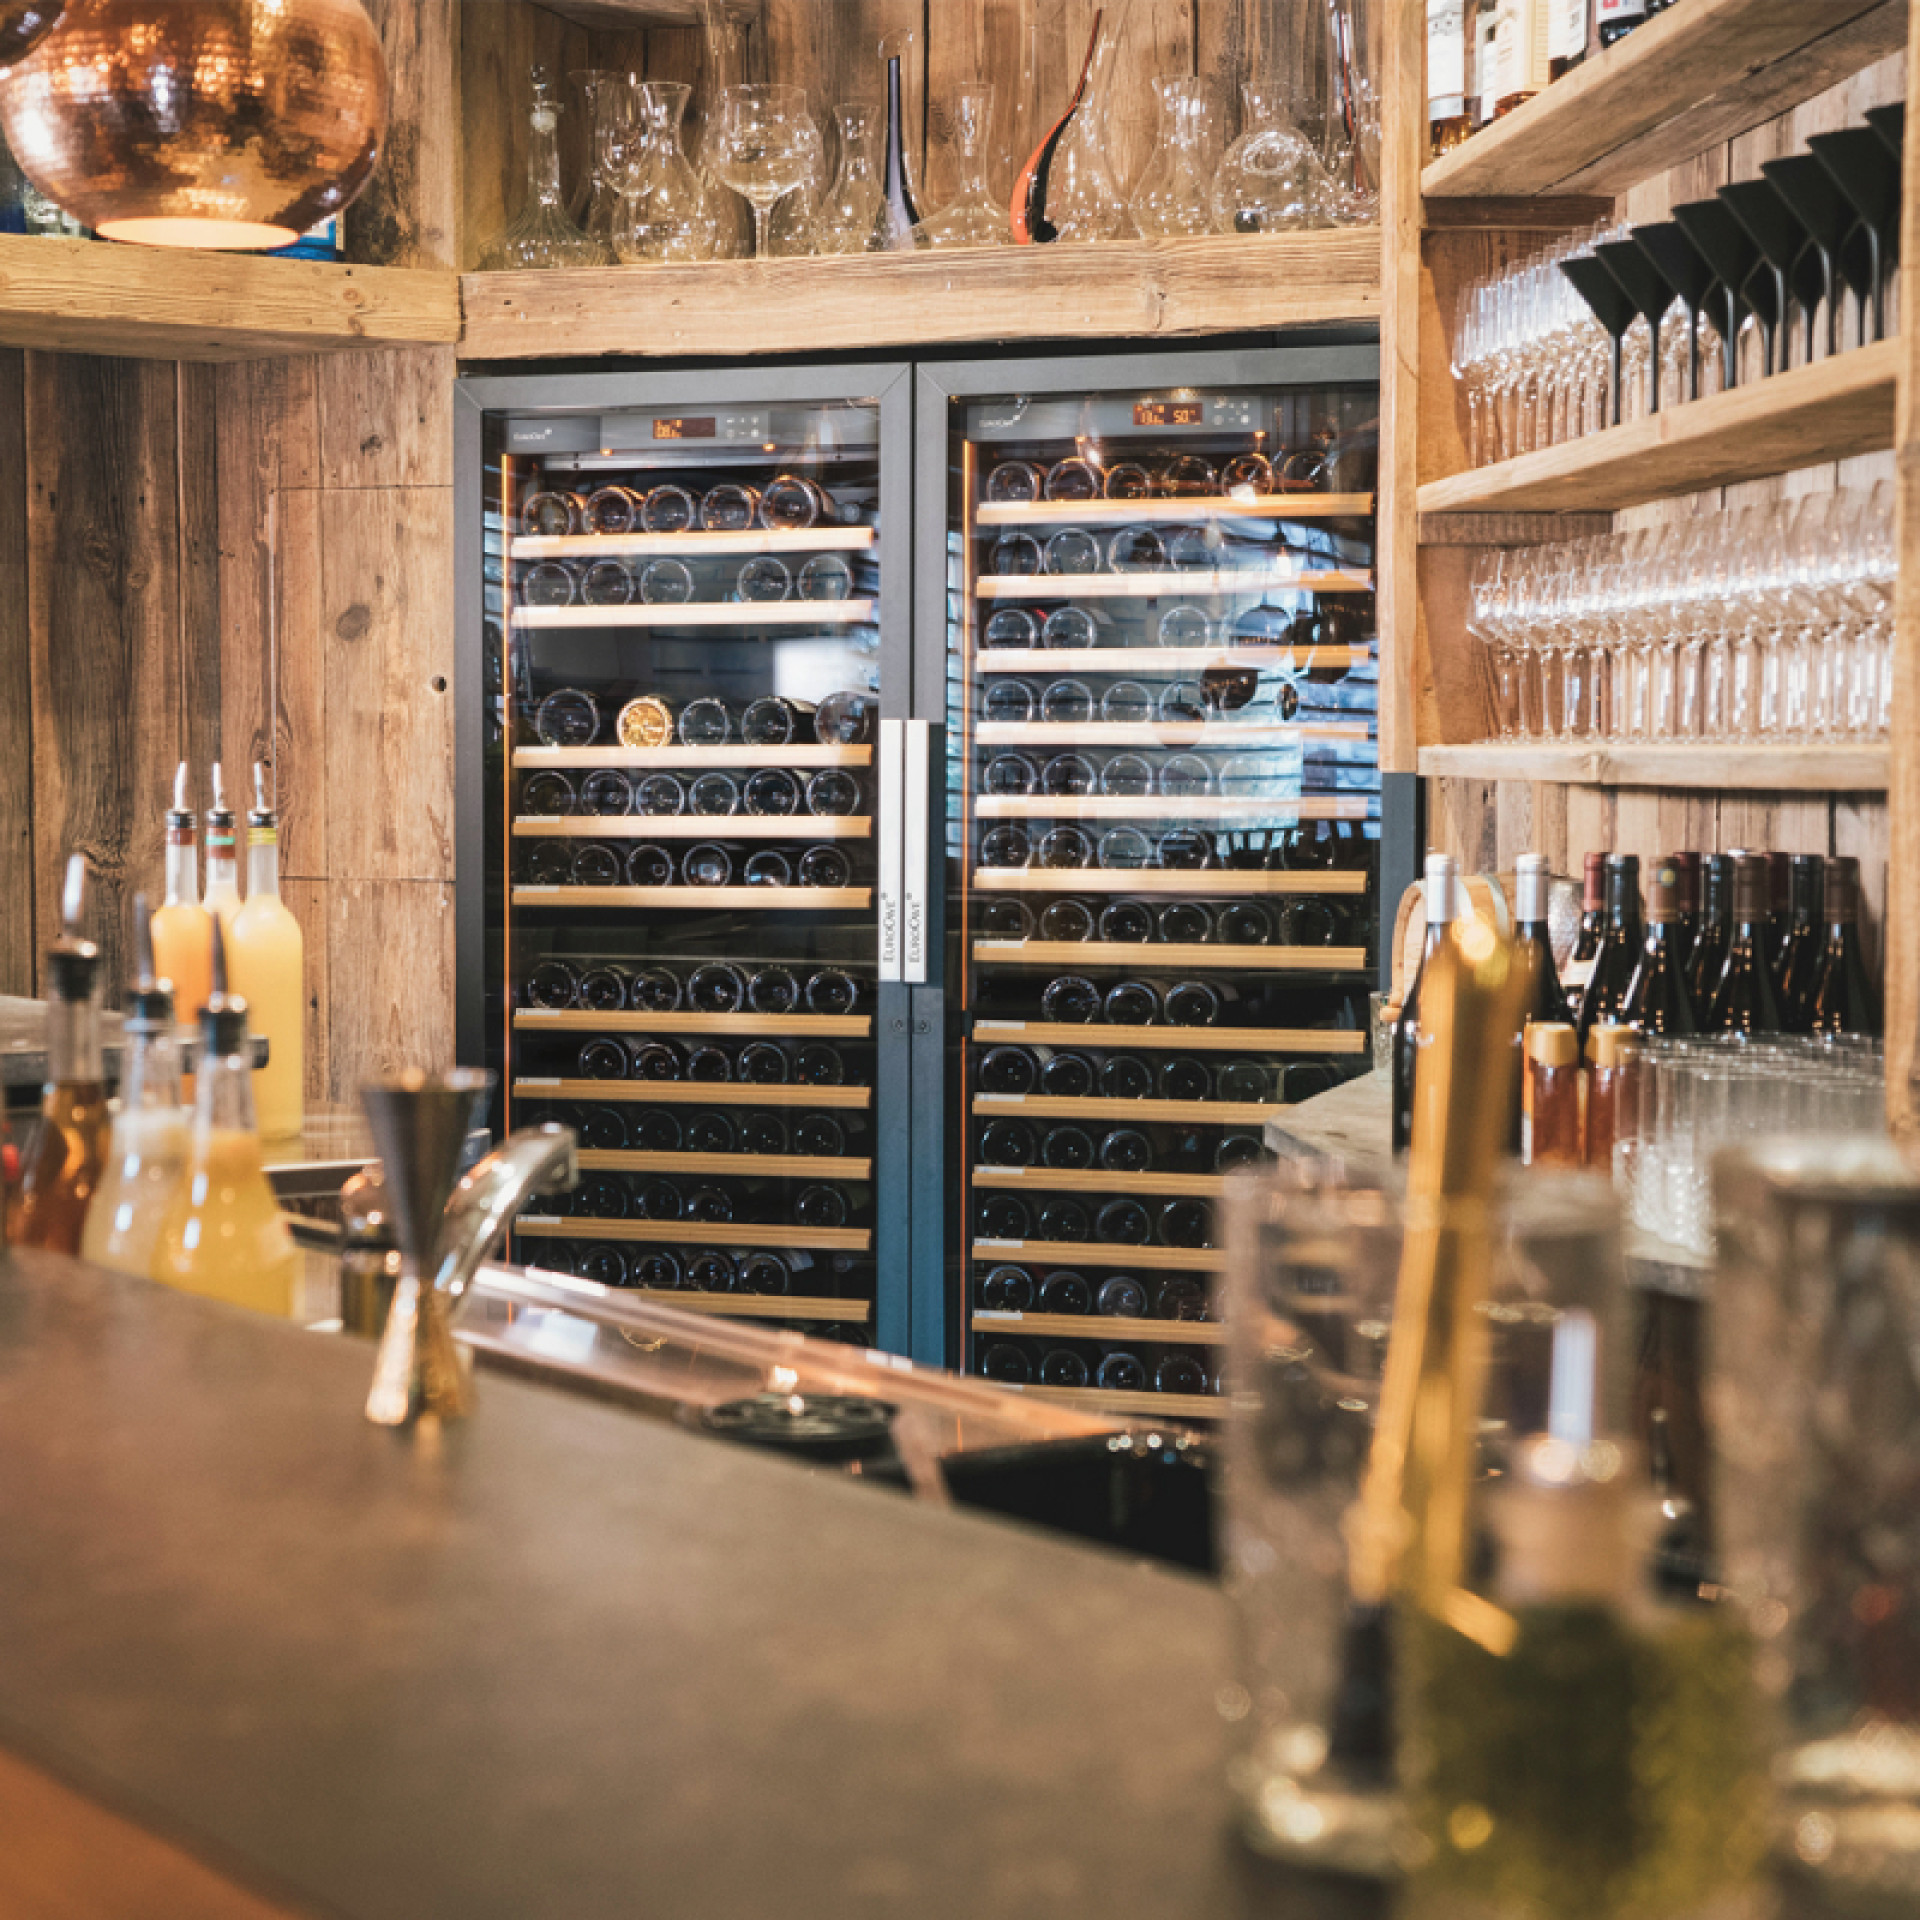 Professional service cabinets installed behind the counter: dual zone cellar with 2 independent temperature compartments and multi-temperature cooler.